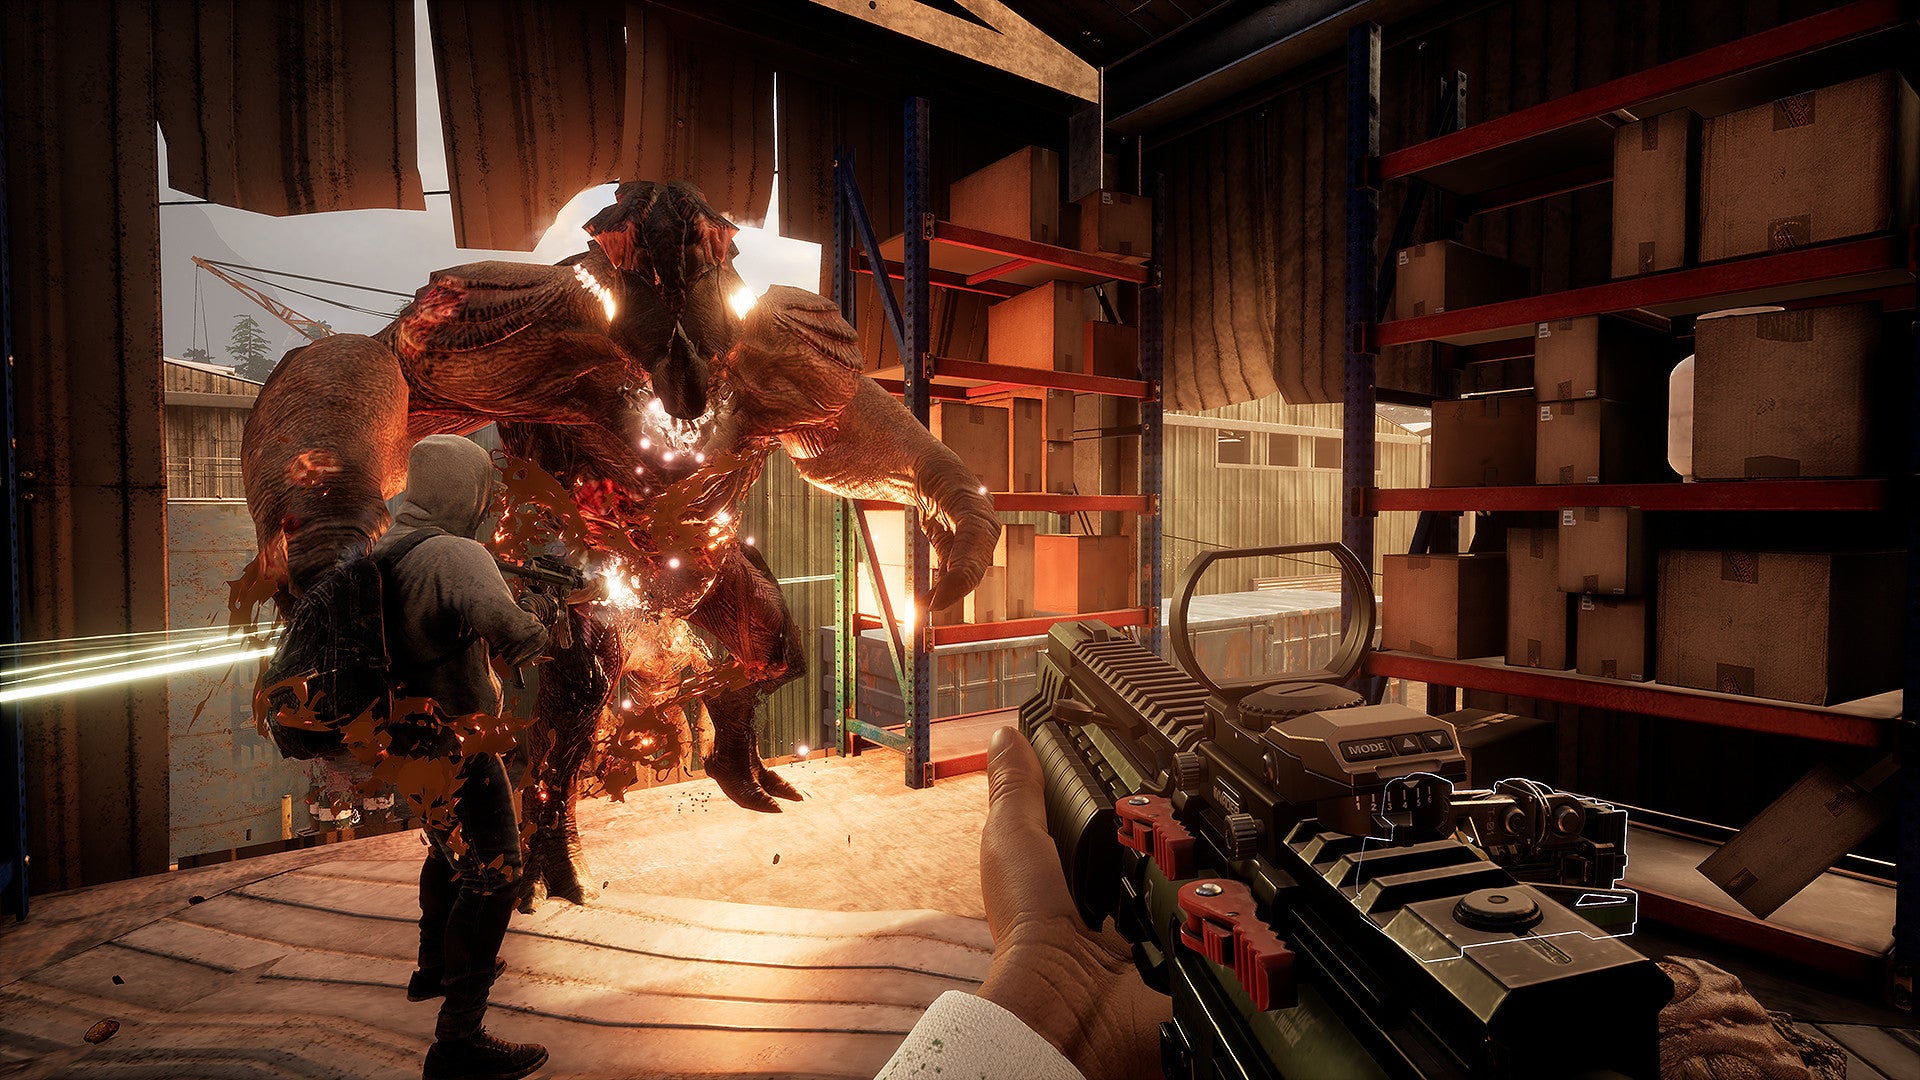 Image for Left 4 Dead-inspired co-op shooter Earthfall launches this July